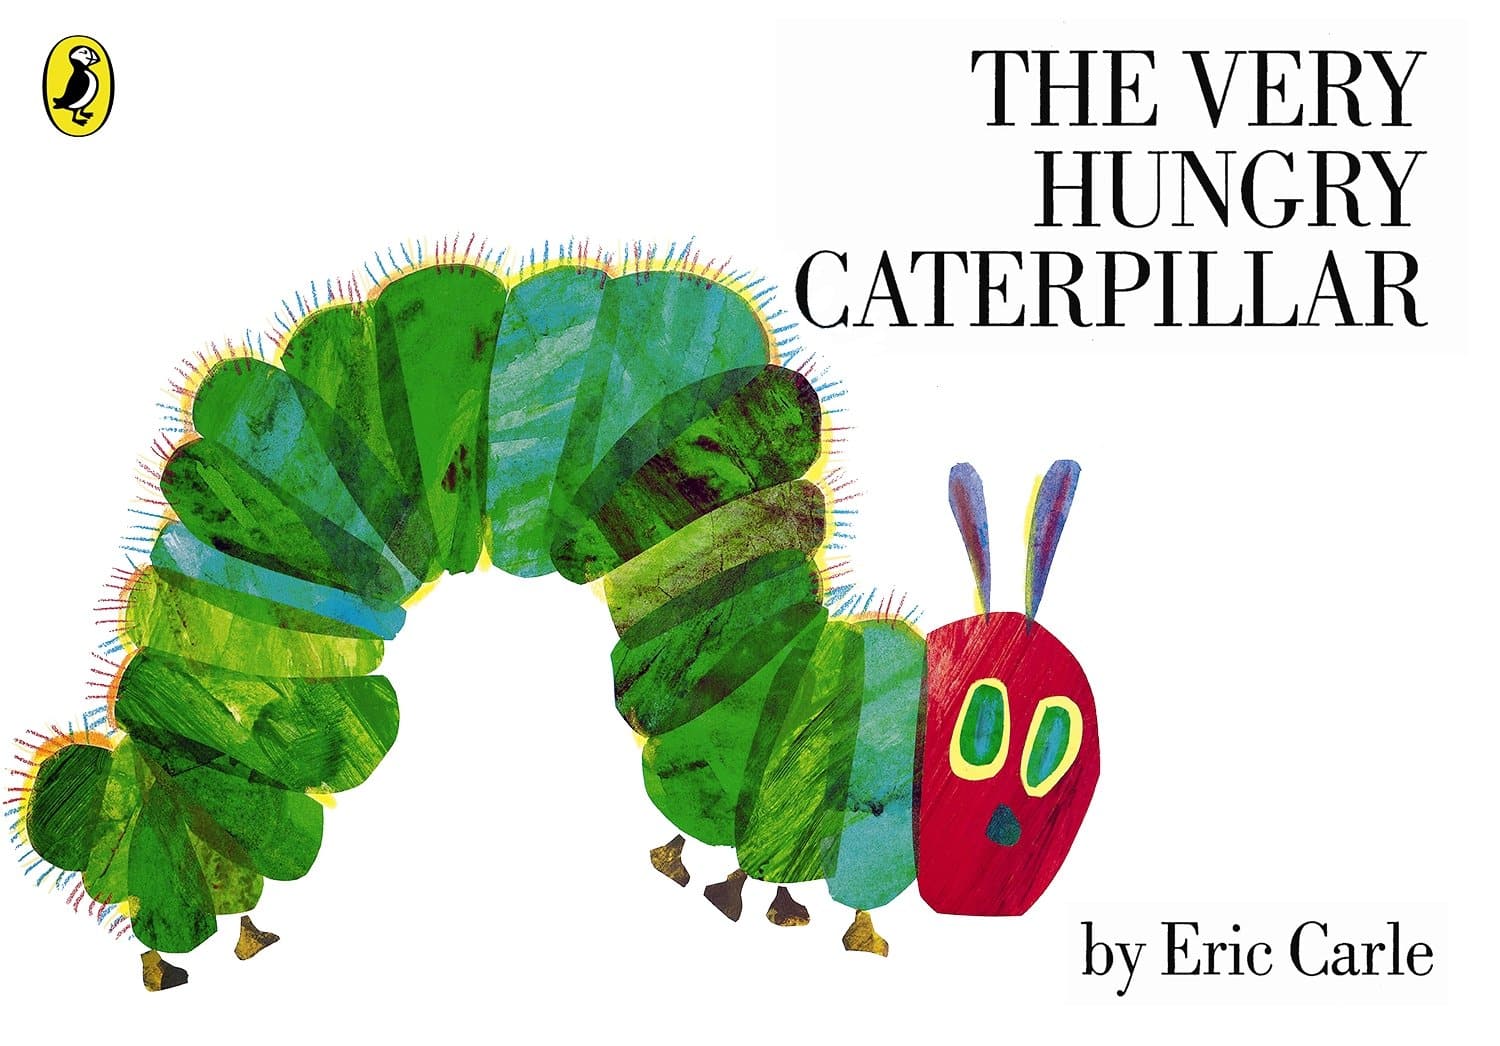 Very hungry caterpillaring? [That night he had a stomach ache!]